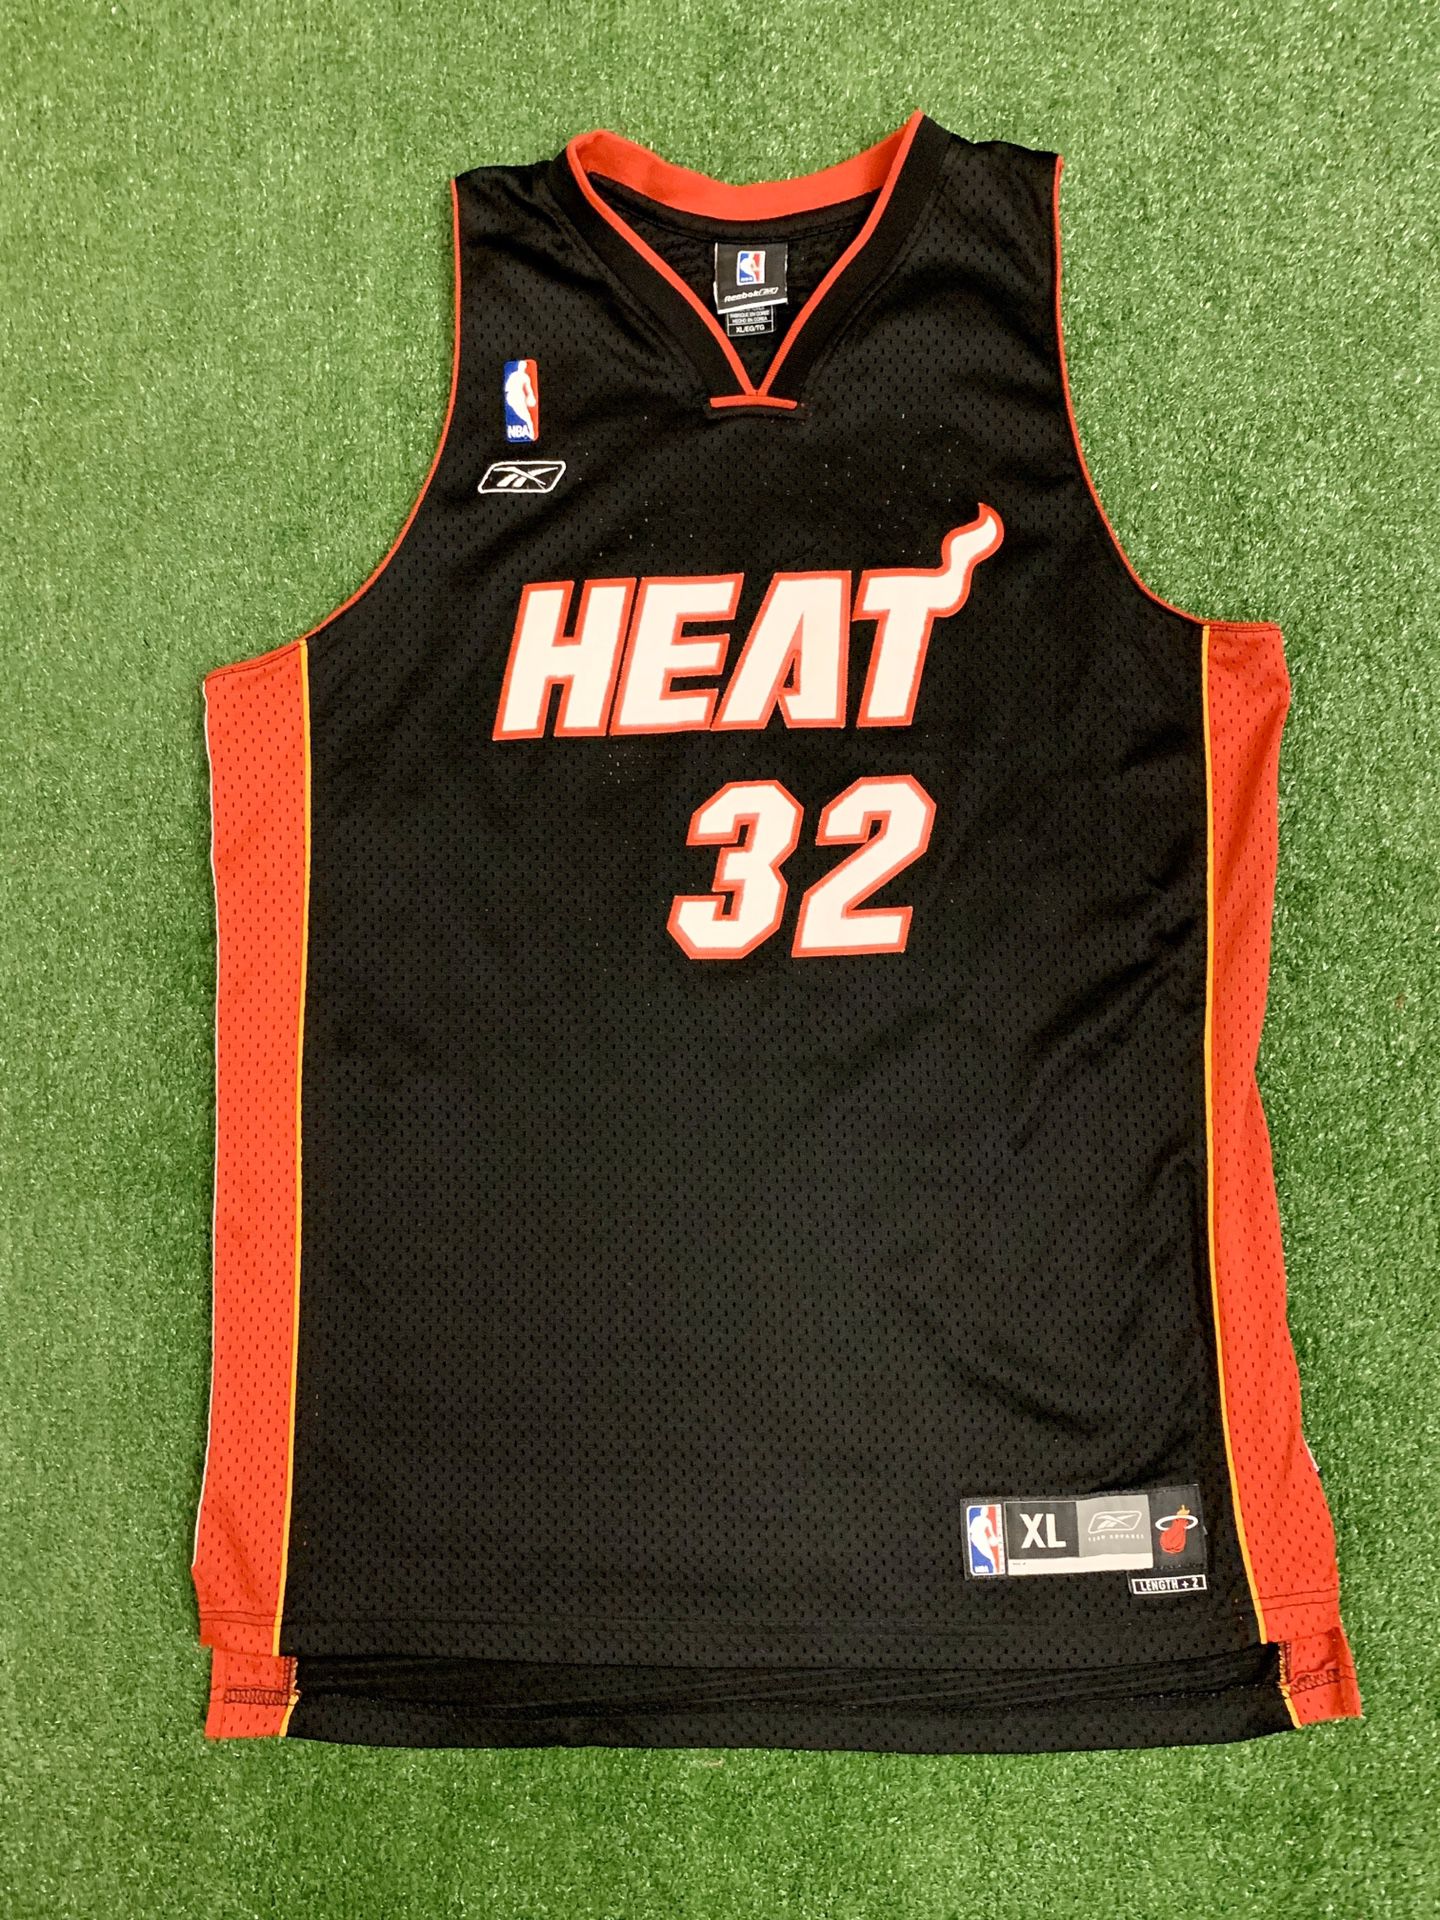 NBA. Vintage 2006 Miami Heat Shaquille O’Neal Stitched Reebok Jersey. Size XL. Good condition.